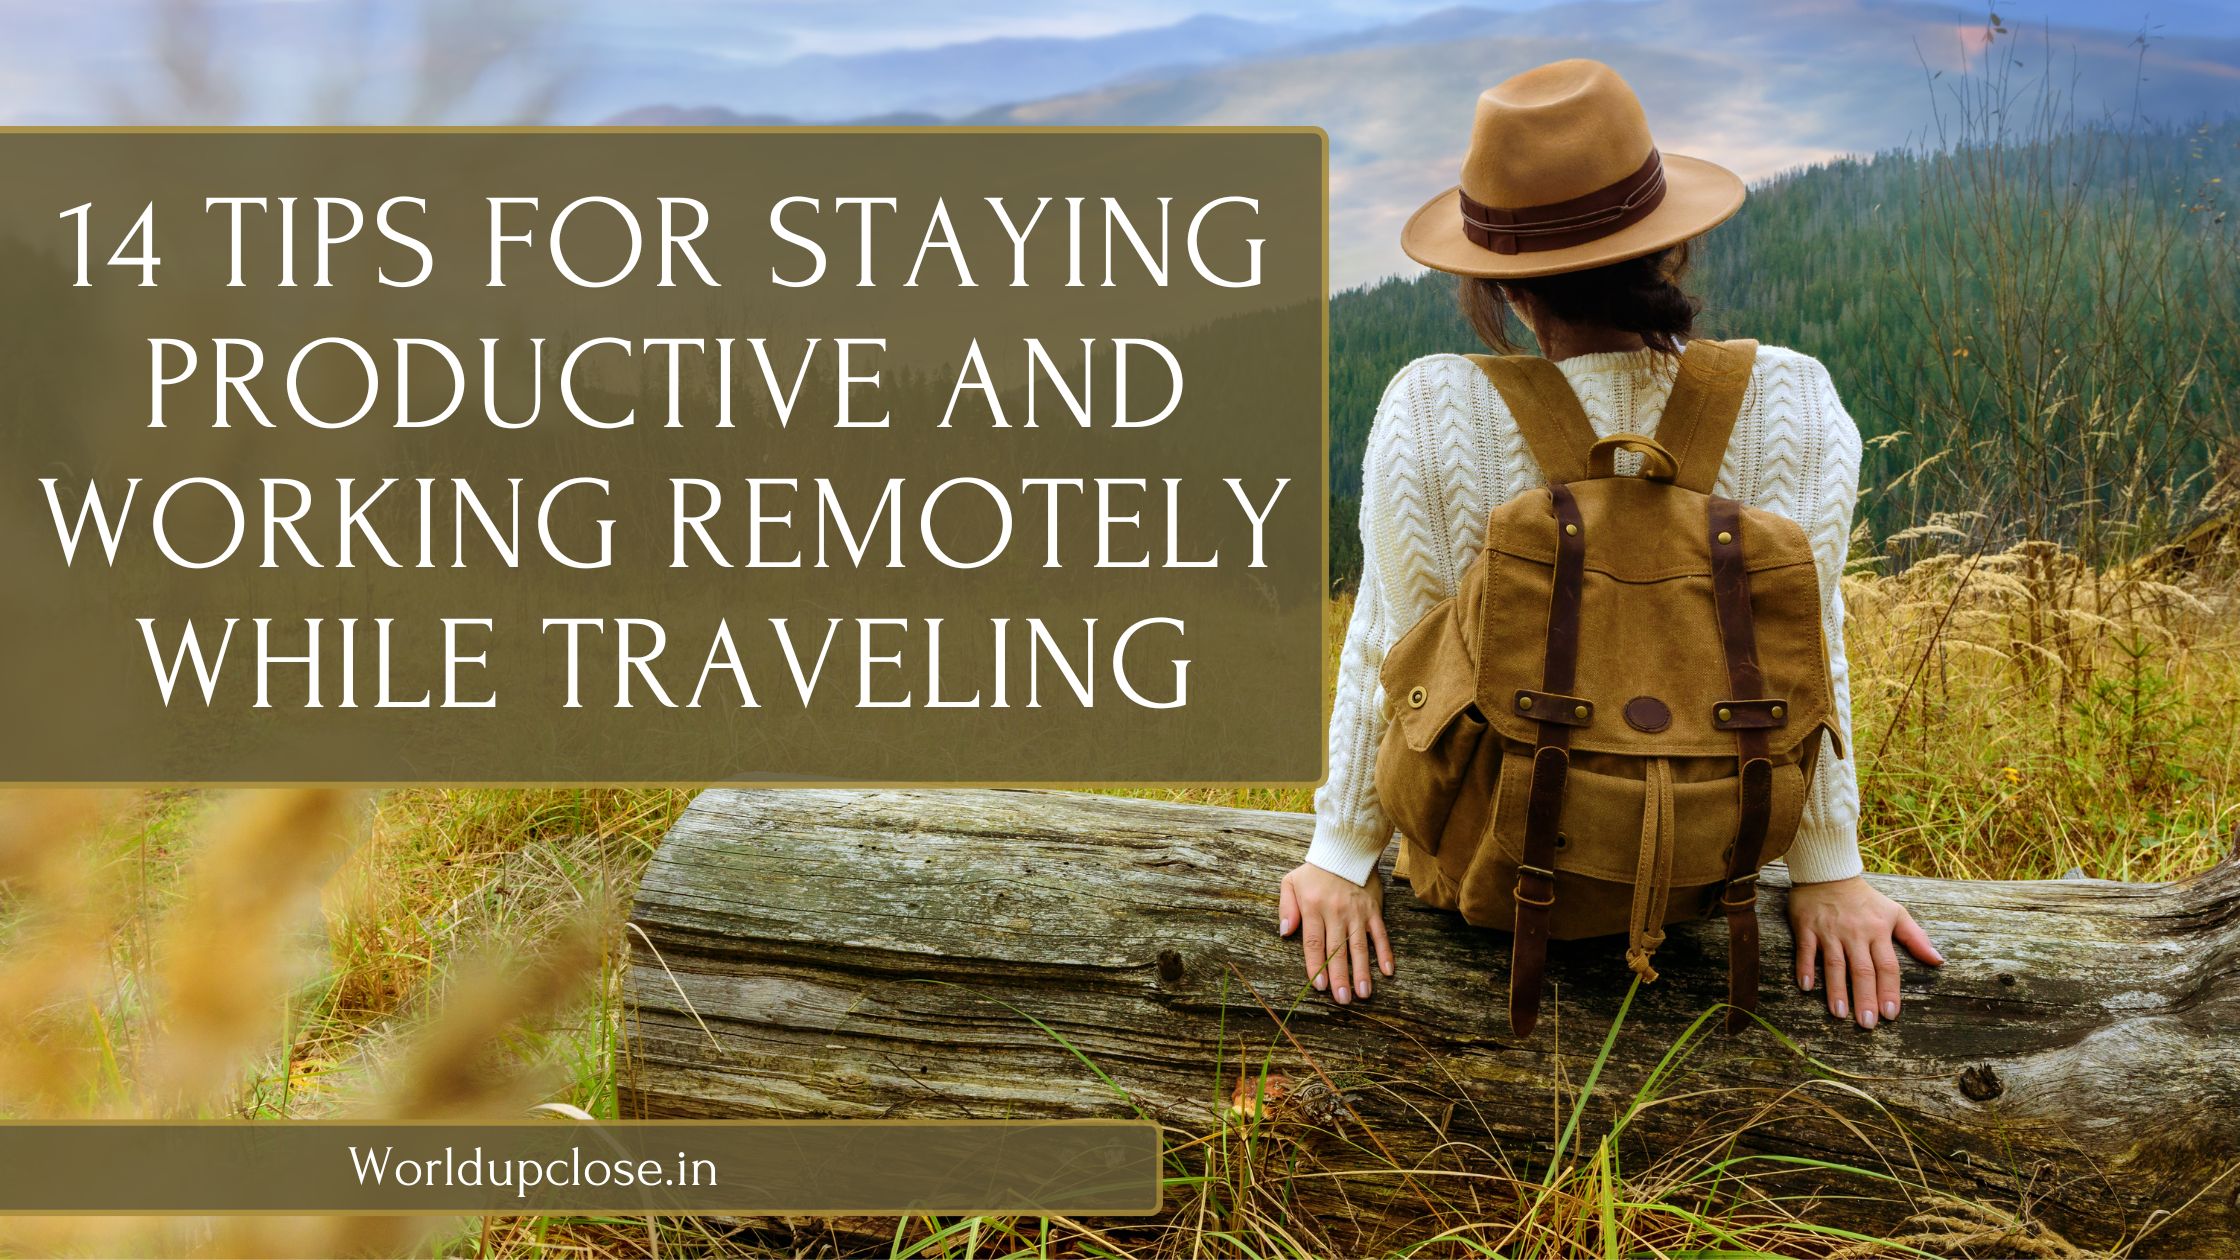 14 Tips for staying productive and working remotely while traveling 2